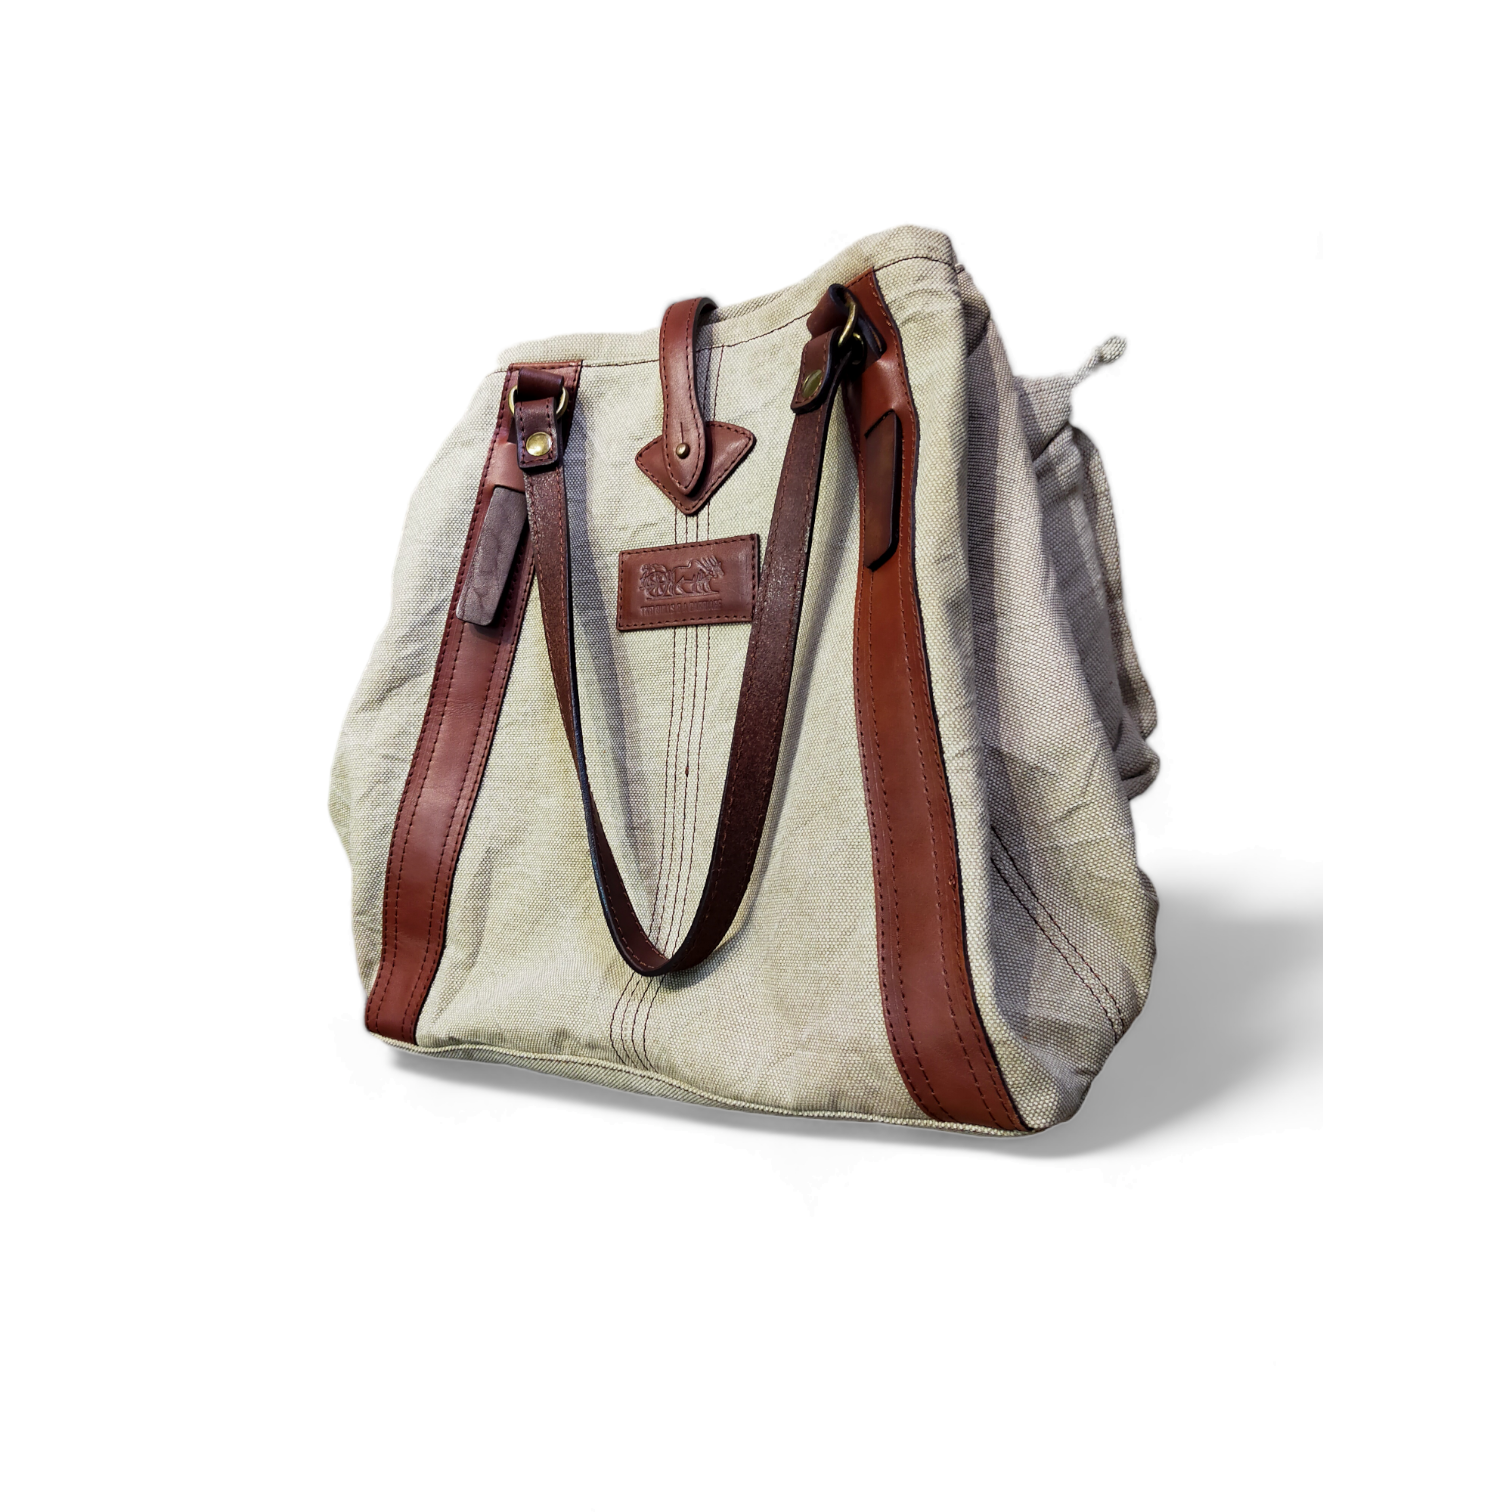 Canvas bag with natural leather parts